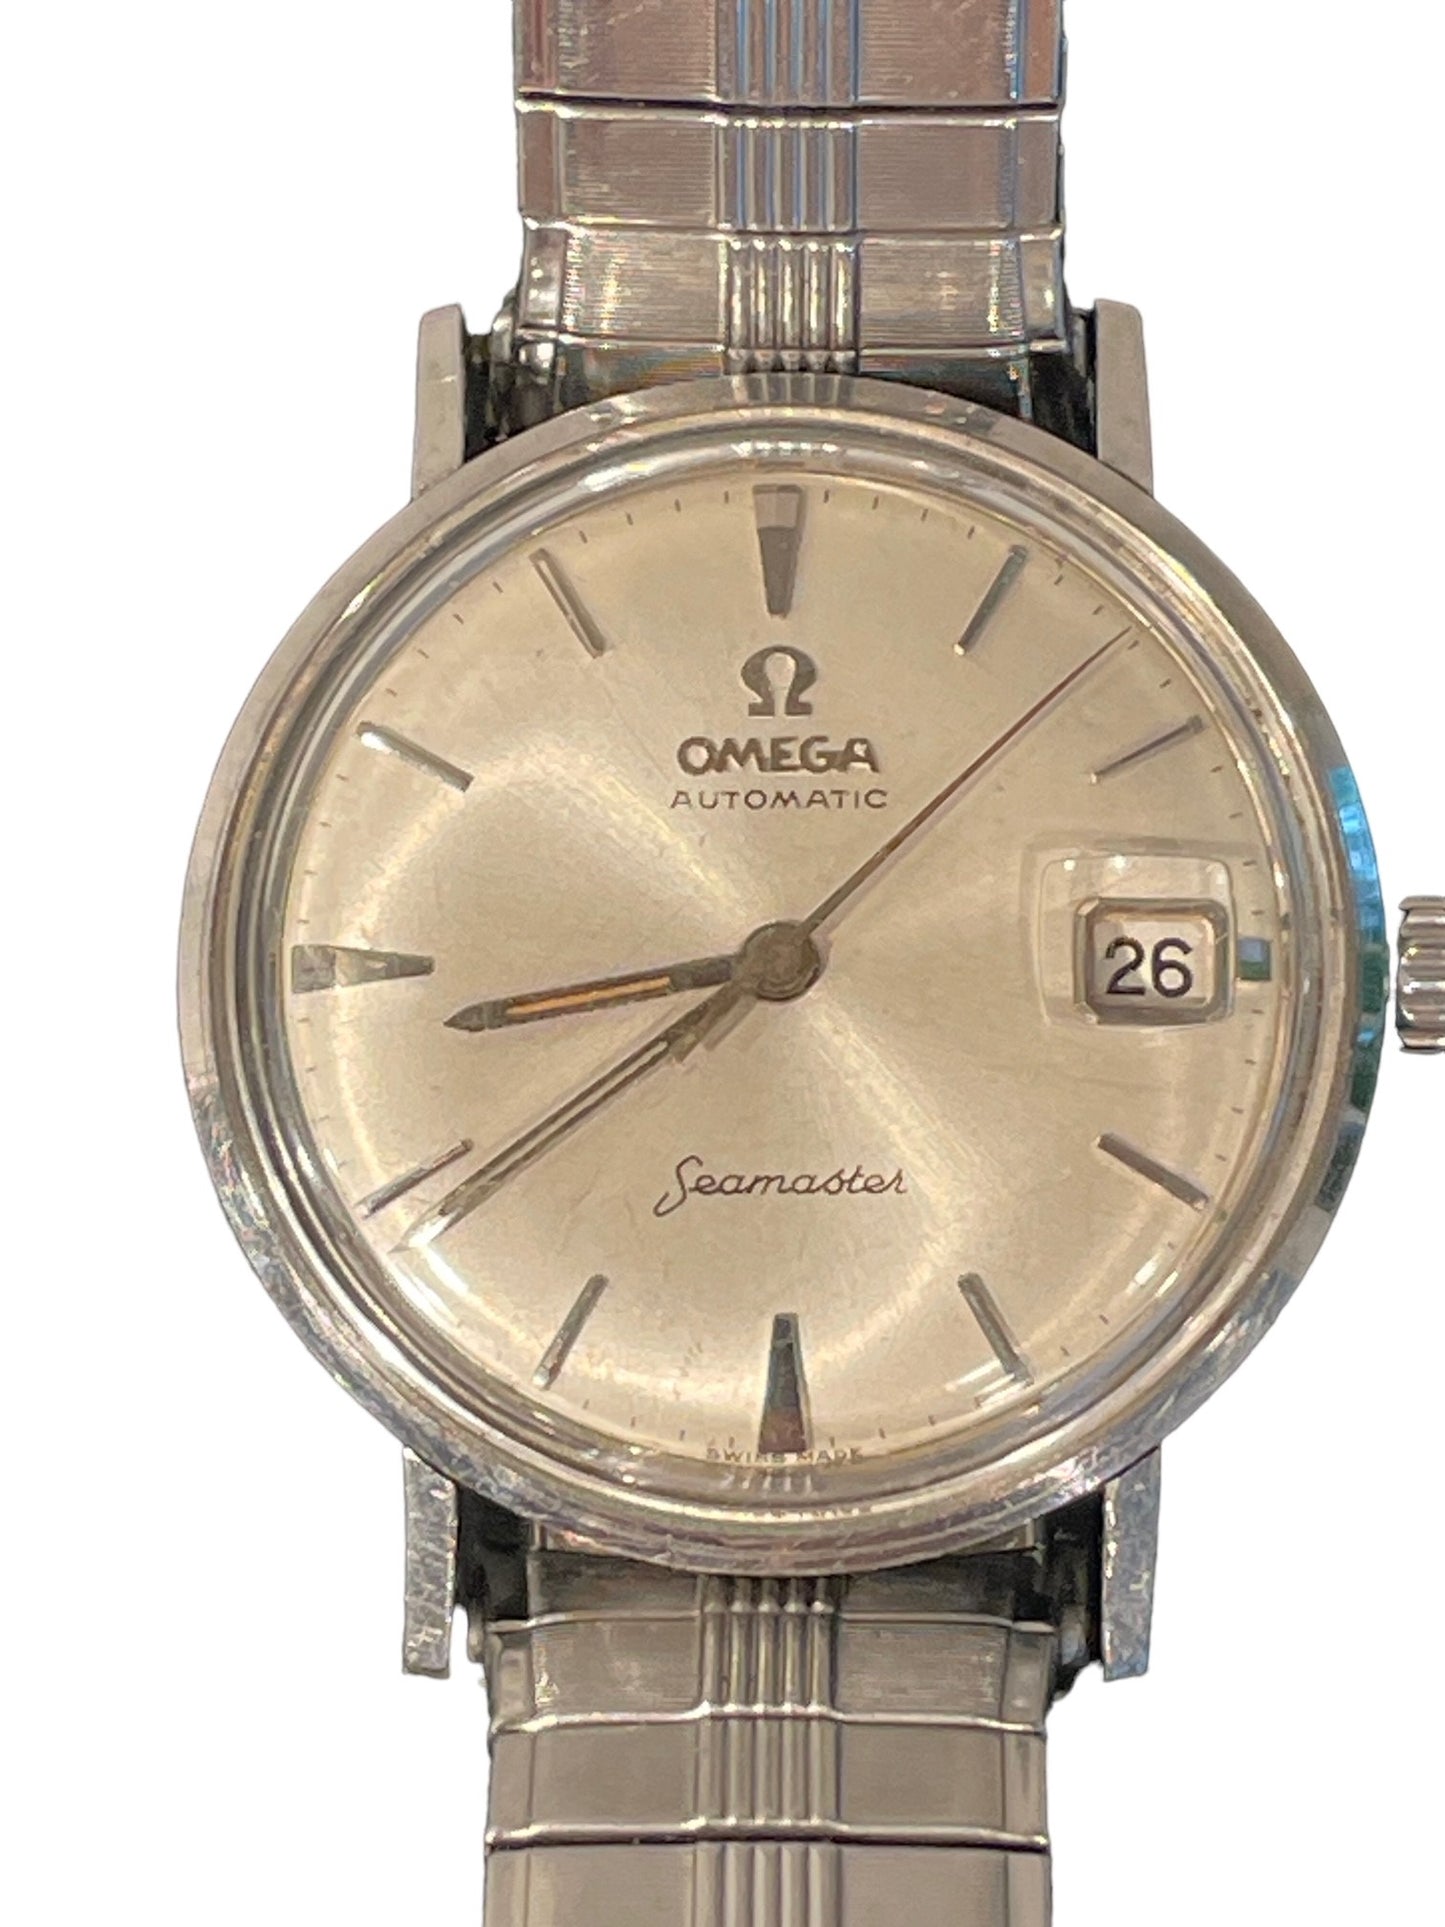 Omega Seamaster Automatic Stainless Watch 14770-2SC cal.562 1961 HH191-1